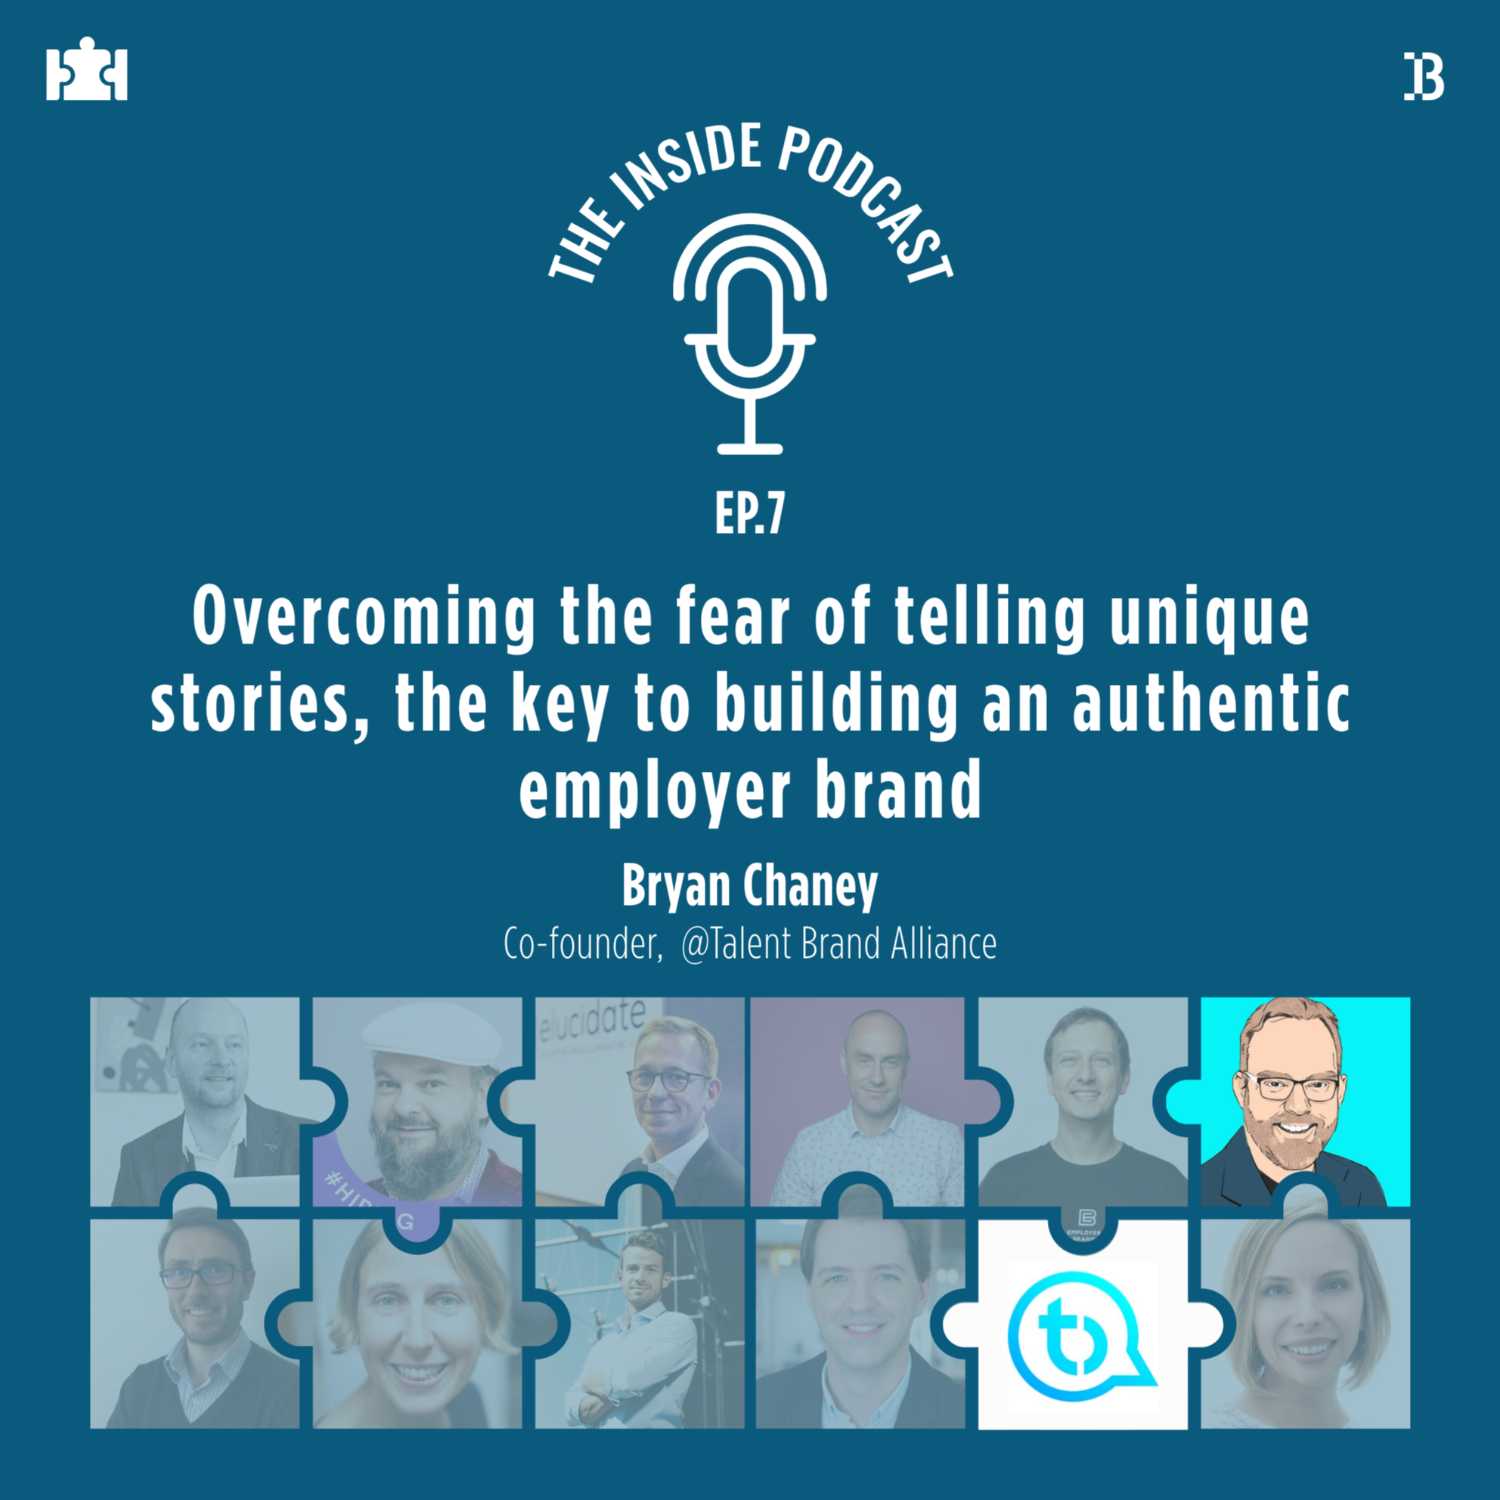 Employer Branding T.I.P S06Ep.7 | “Overcoming the fear of telling unique stories, the key to building an authentic employer brand”, with Bryan Chaney, Co-founder of Talent Brand Alliance